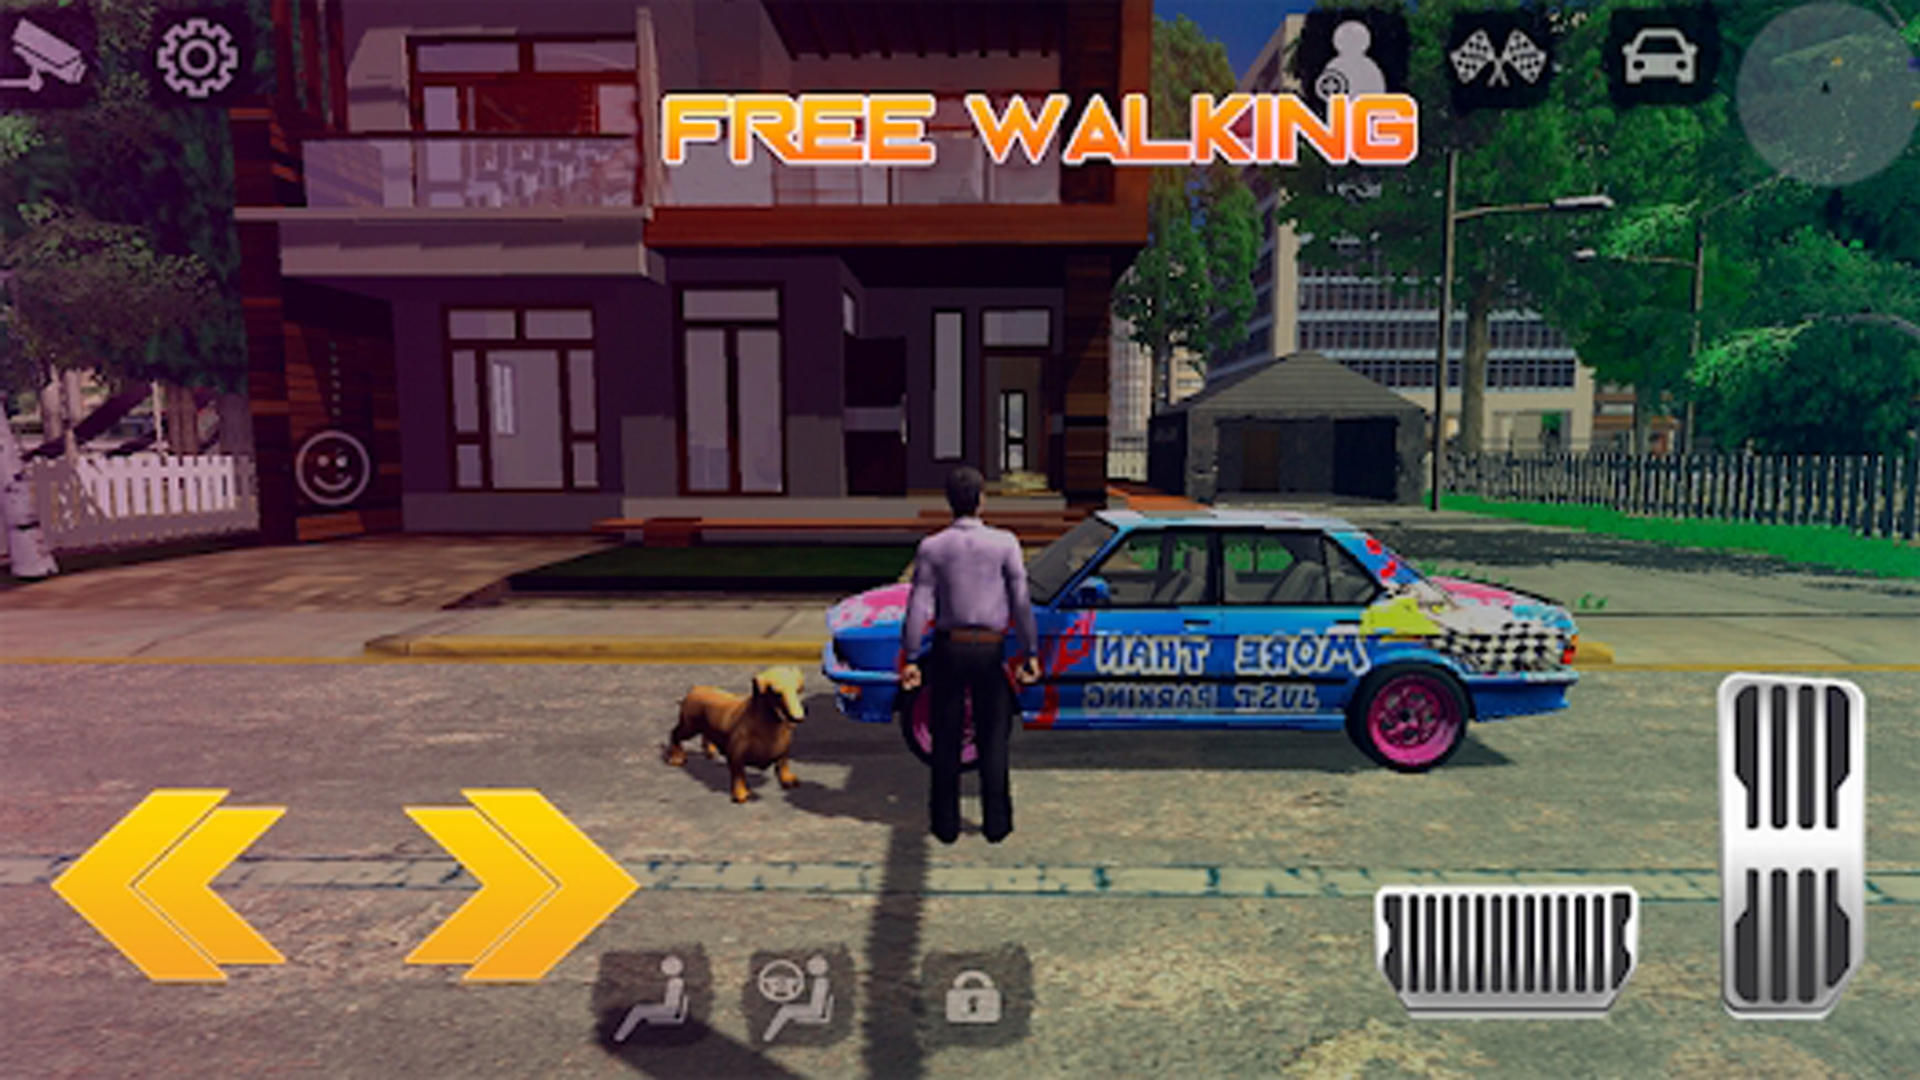 Car Parking Multiplayer 2 APK for Android Download